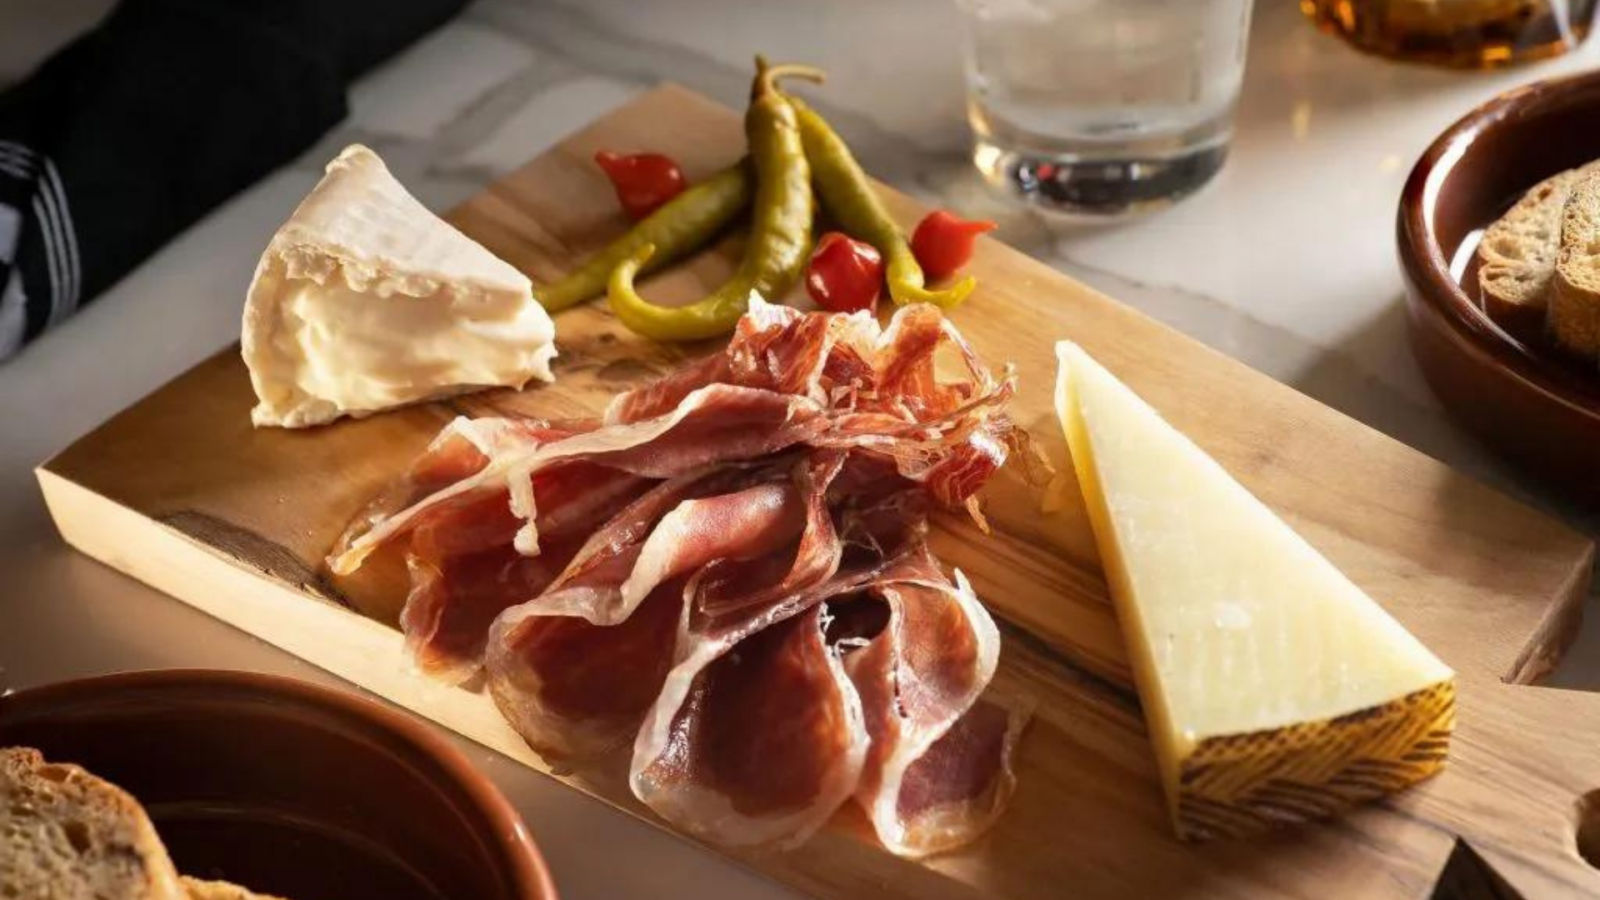 France’s health authority confirms connection between charcuterie and cancer risk